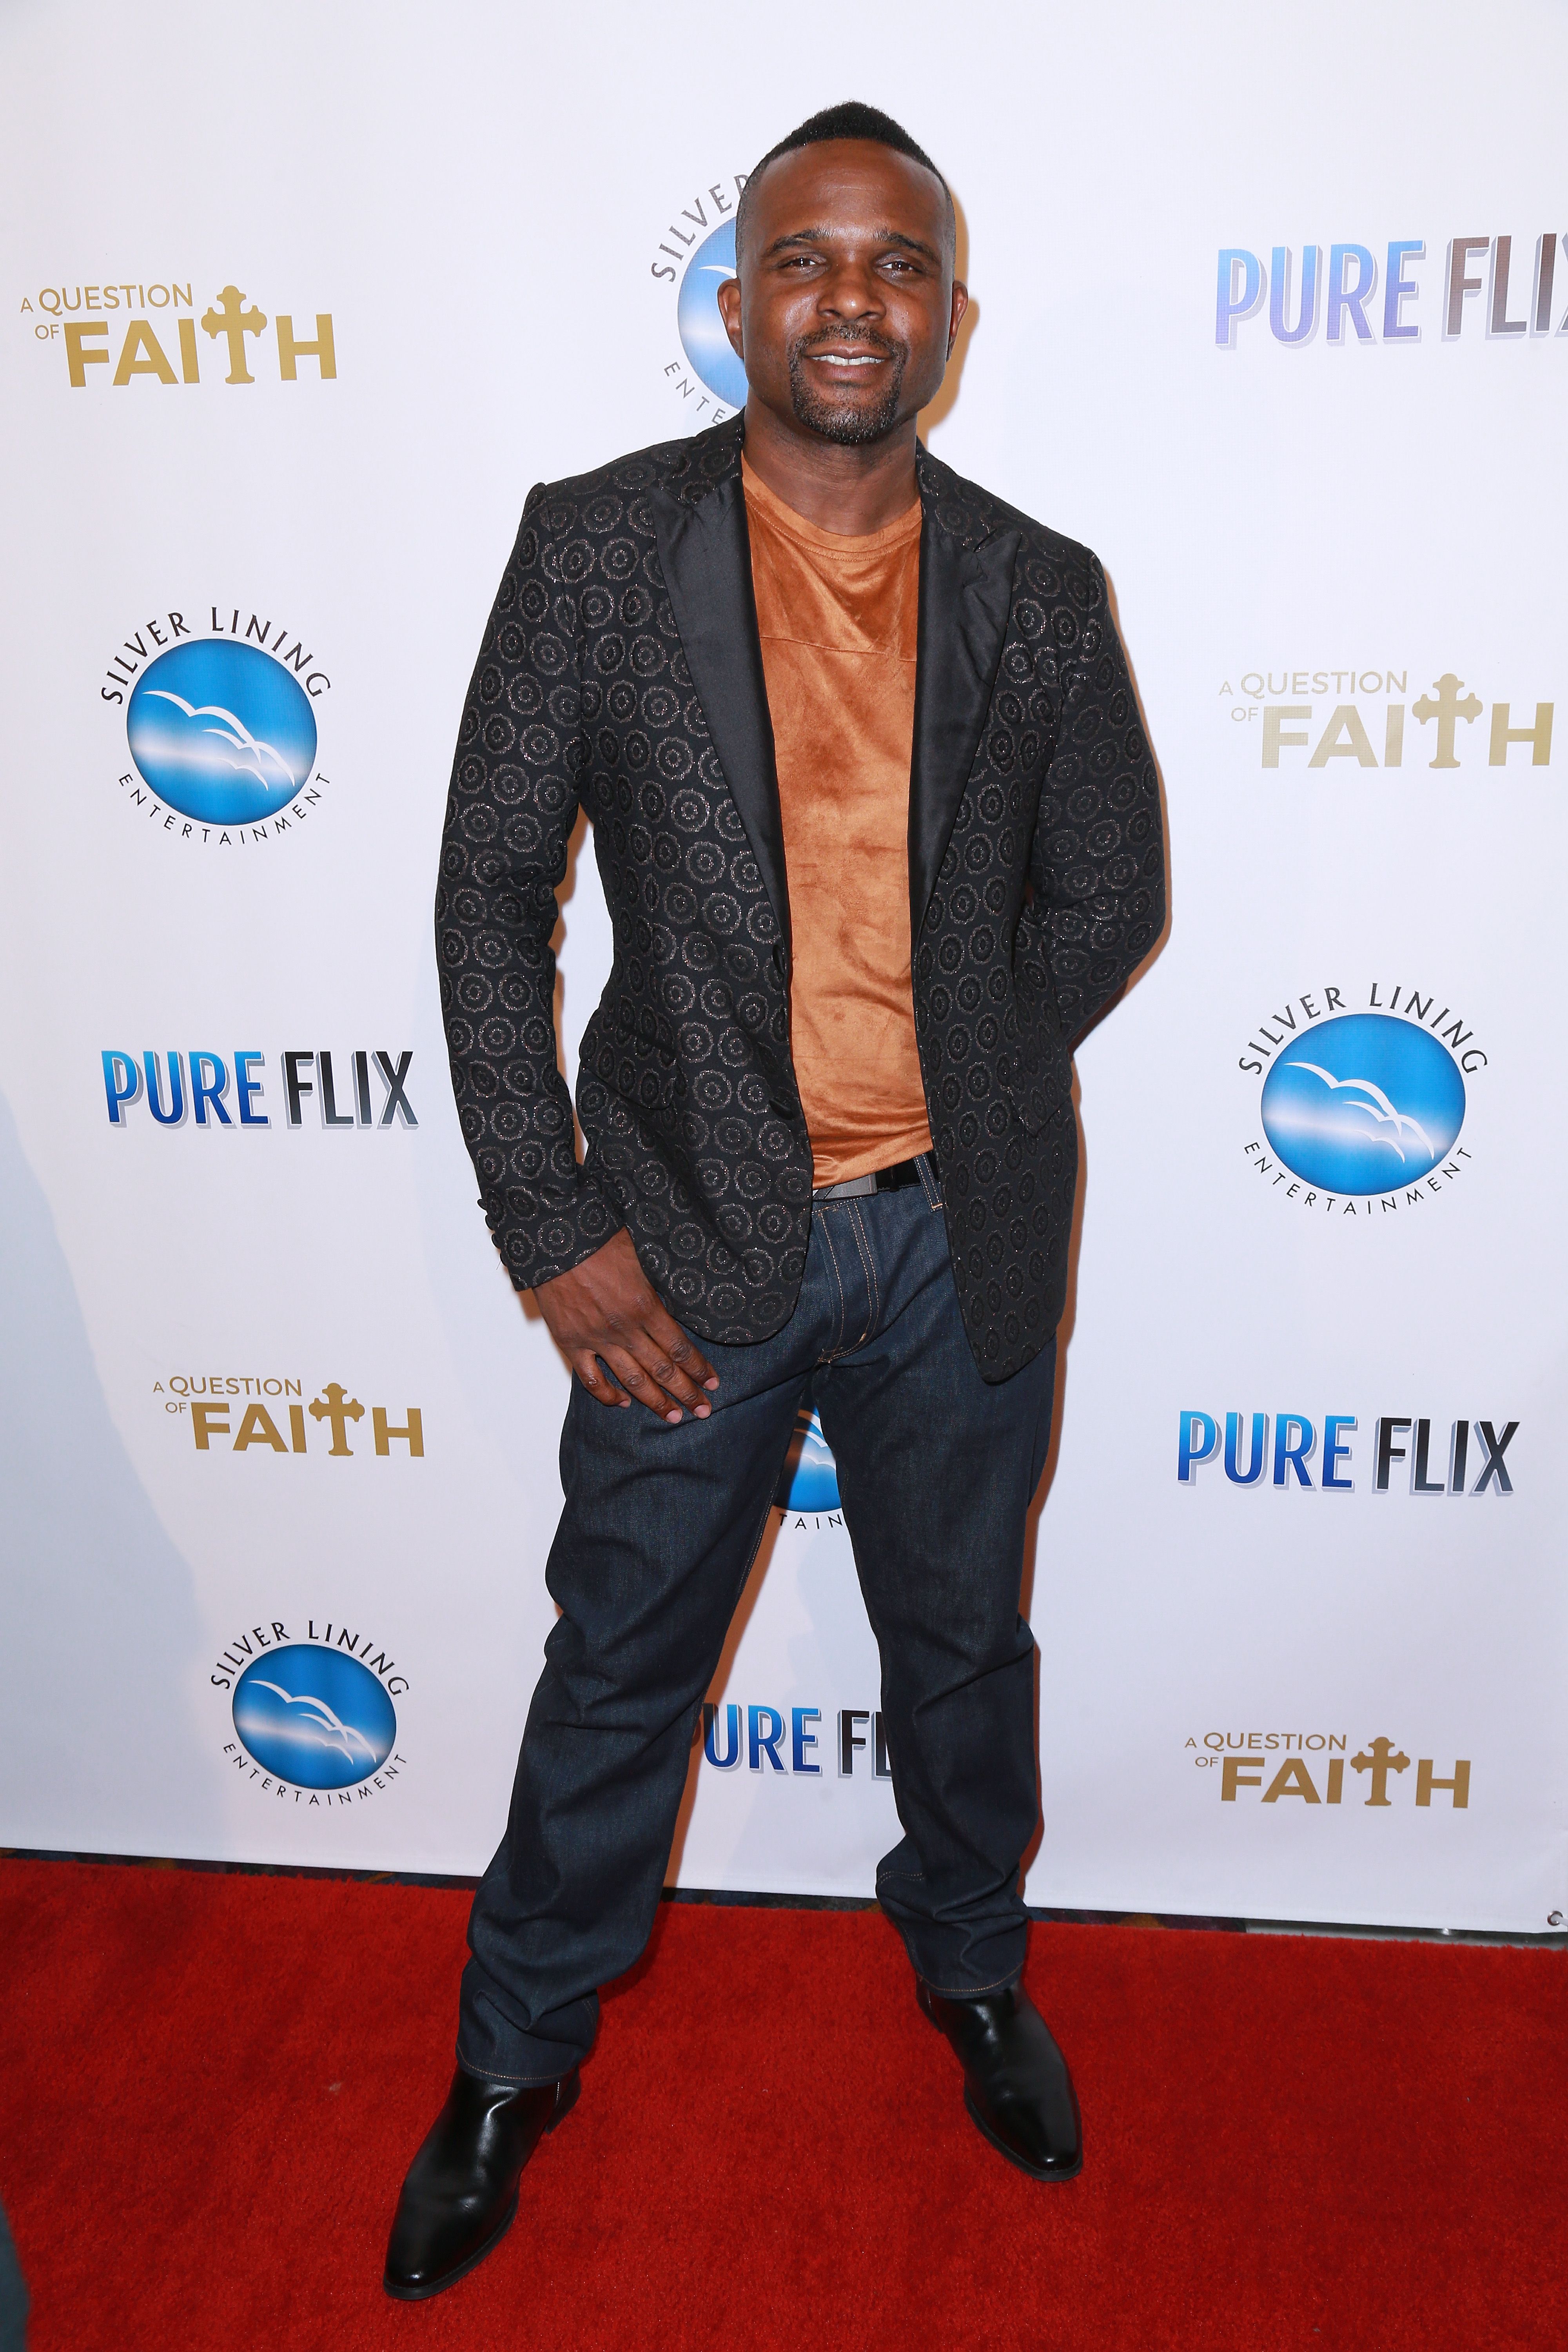 Darius McCrary during the premiere of "A Question of Faith" at Regal 14 at LA Live Downtown on September 27, 2017 in Los Angeles, California. | Source: Getty Images